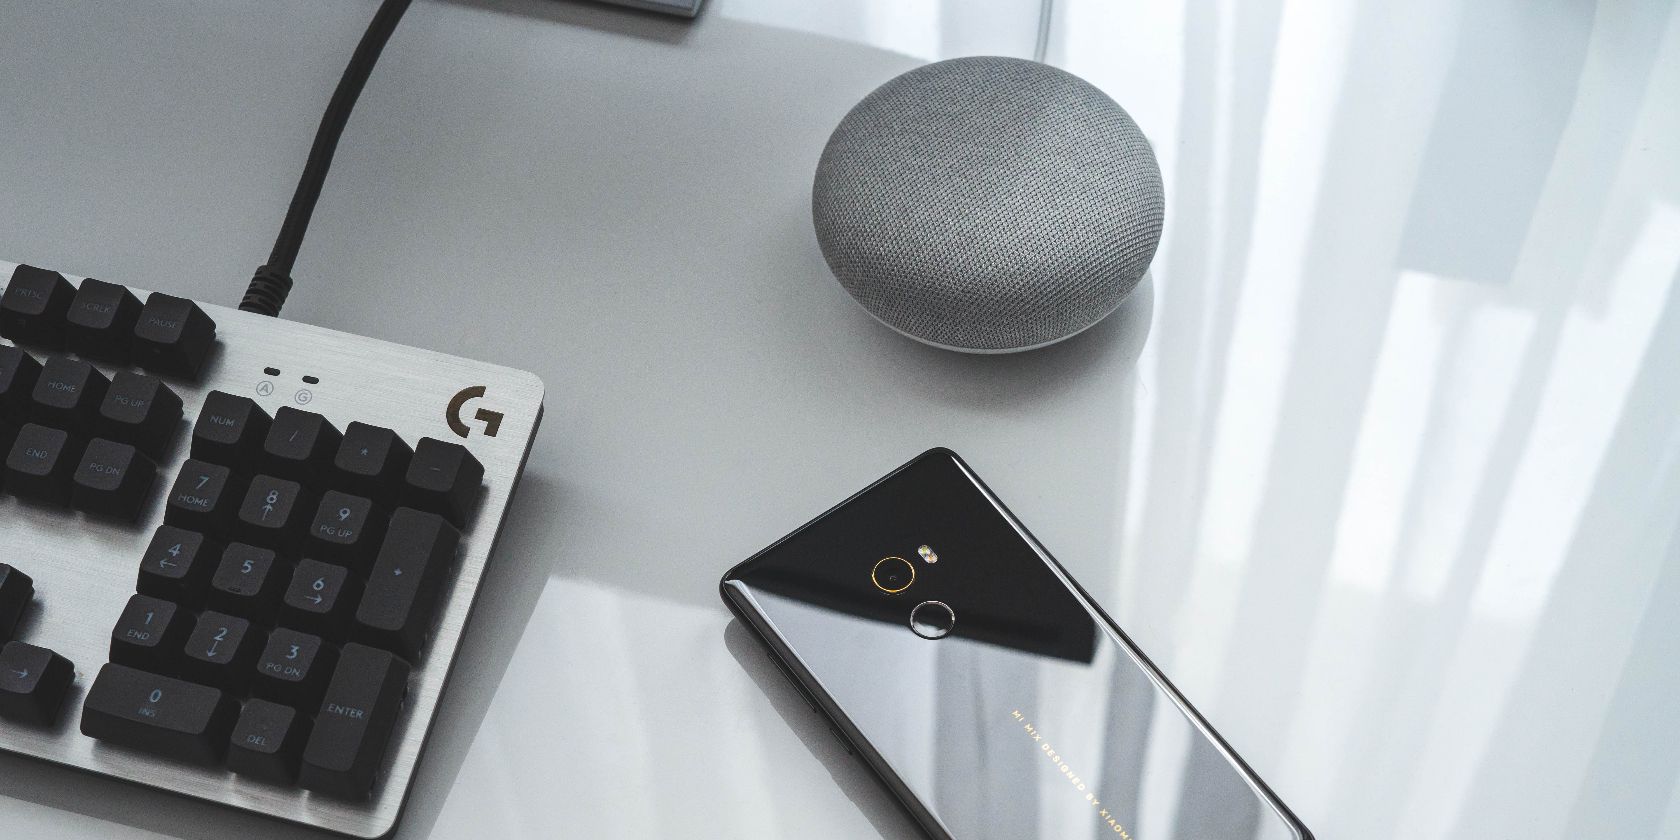 google home, keyboard, and phone on office desk